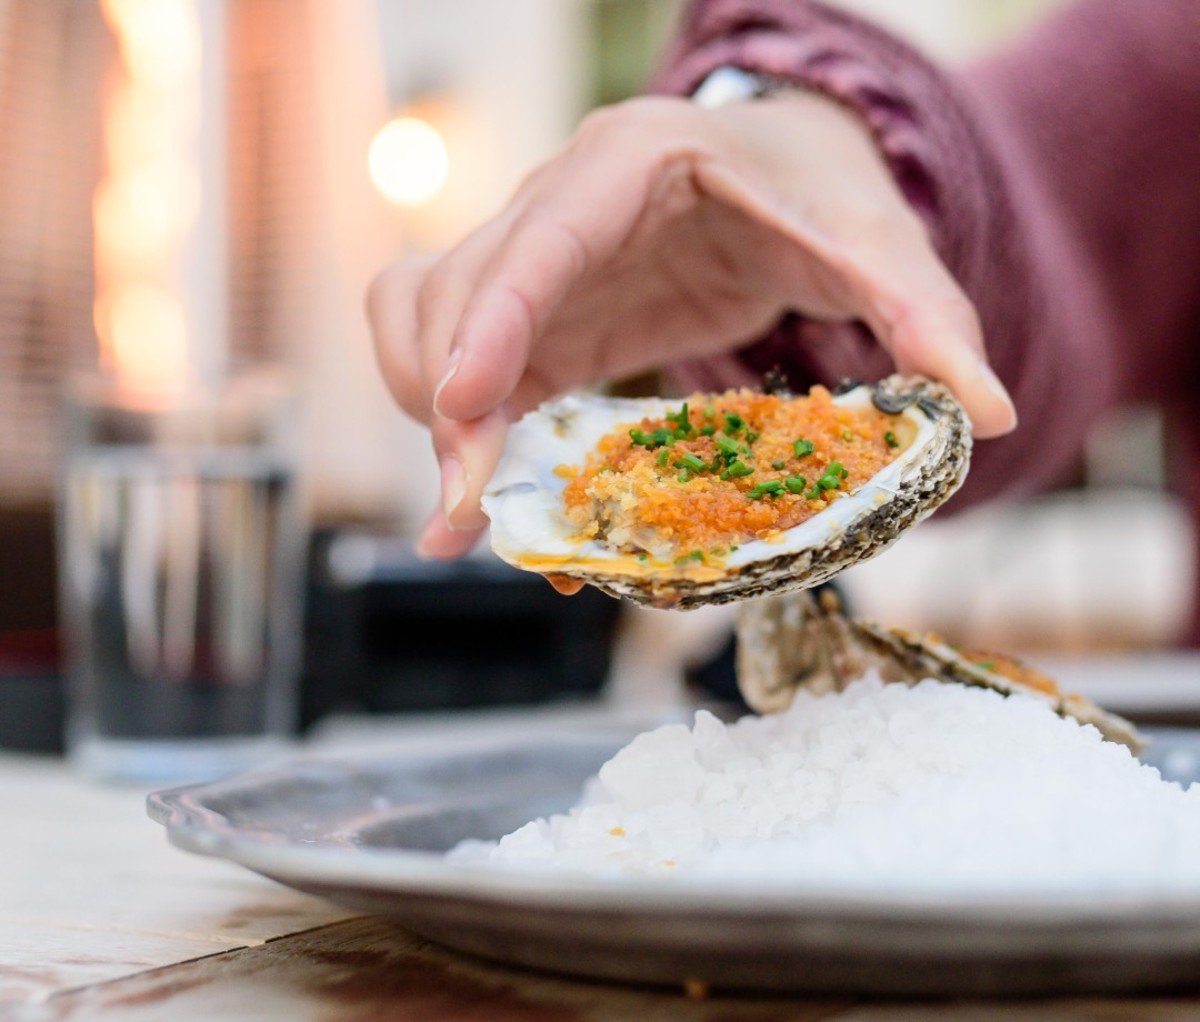 Caucasian man's hand holding roasted oyster